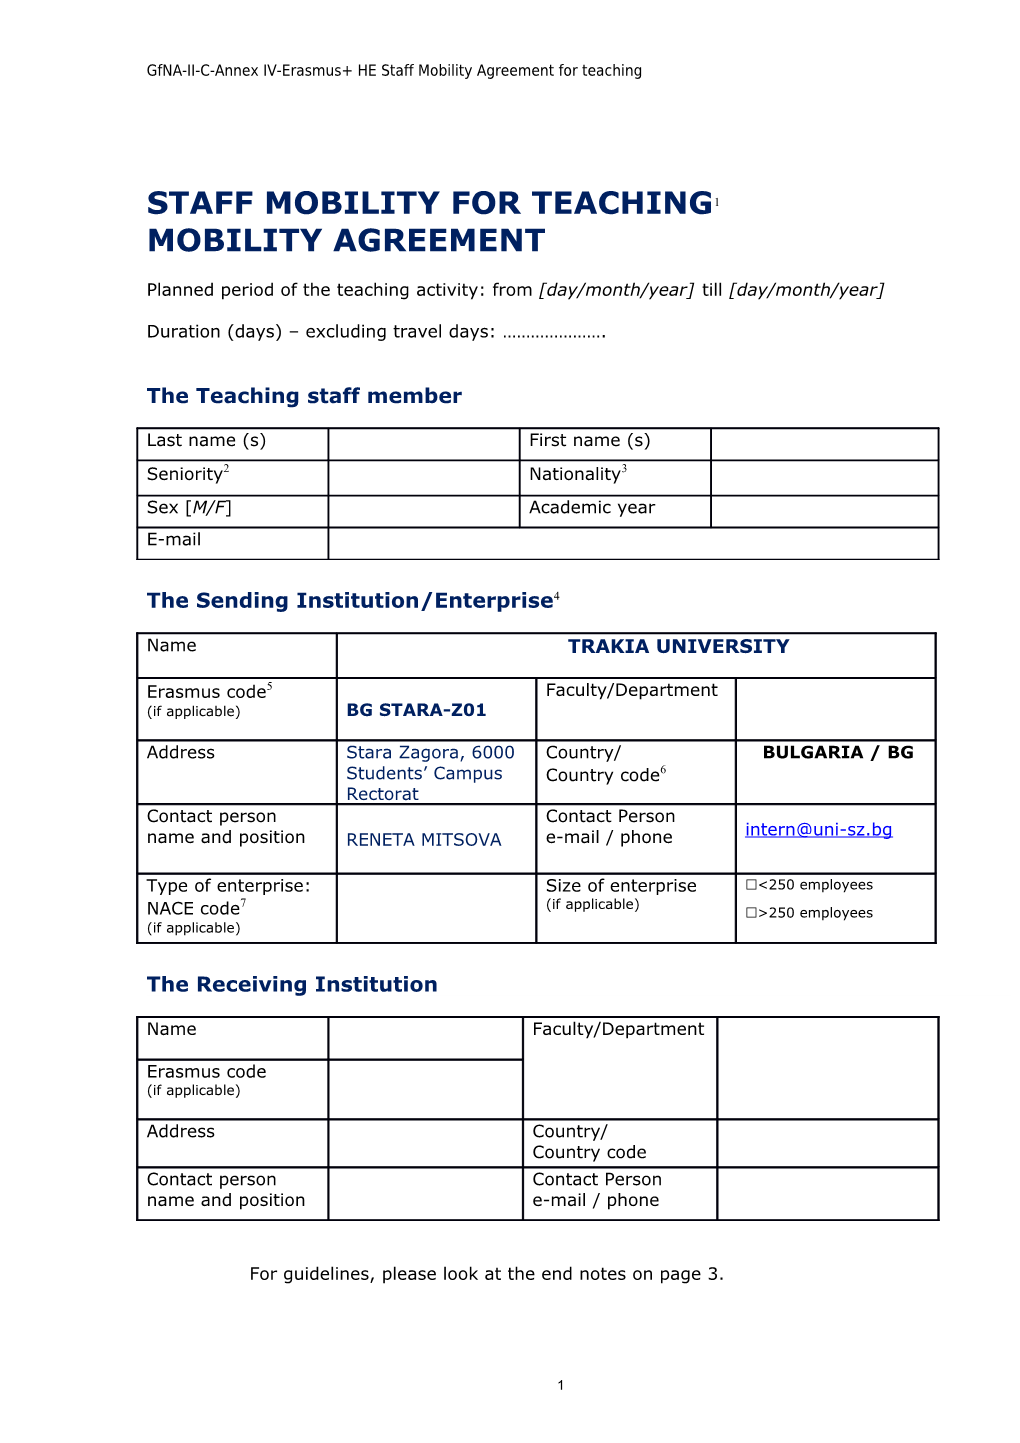 Staff Mobility for Teaching